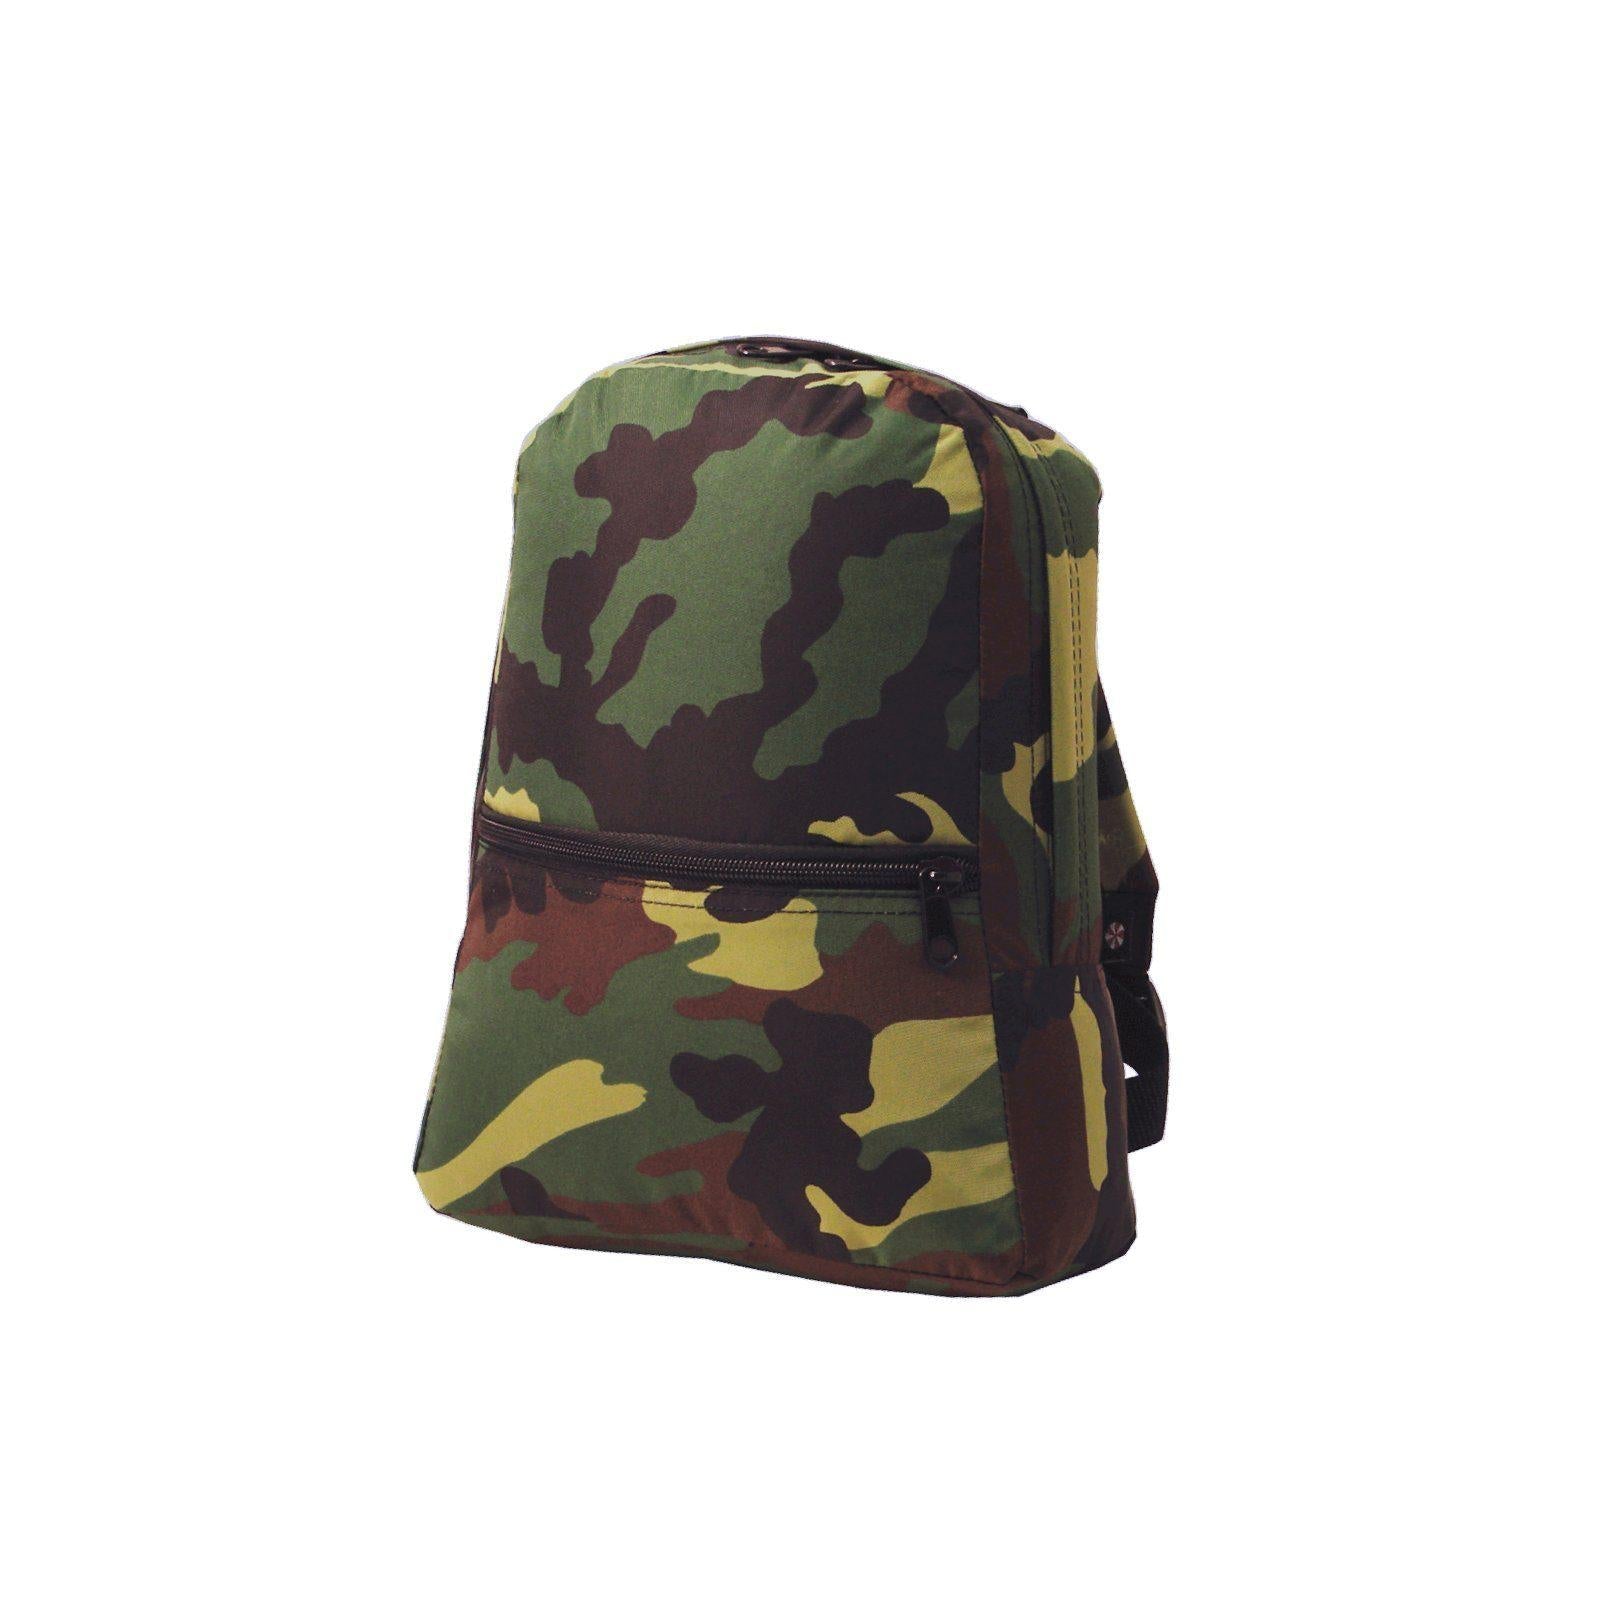 CAMO SMALL BACKPACK TOTES & TRAVEL MINT 